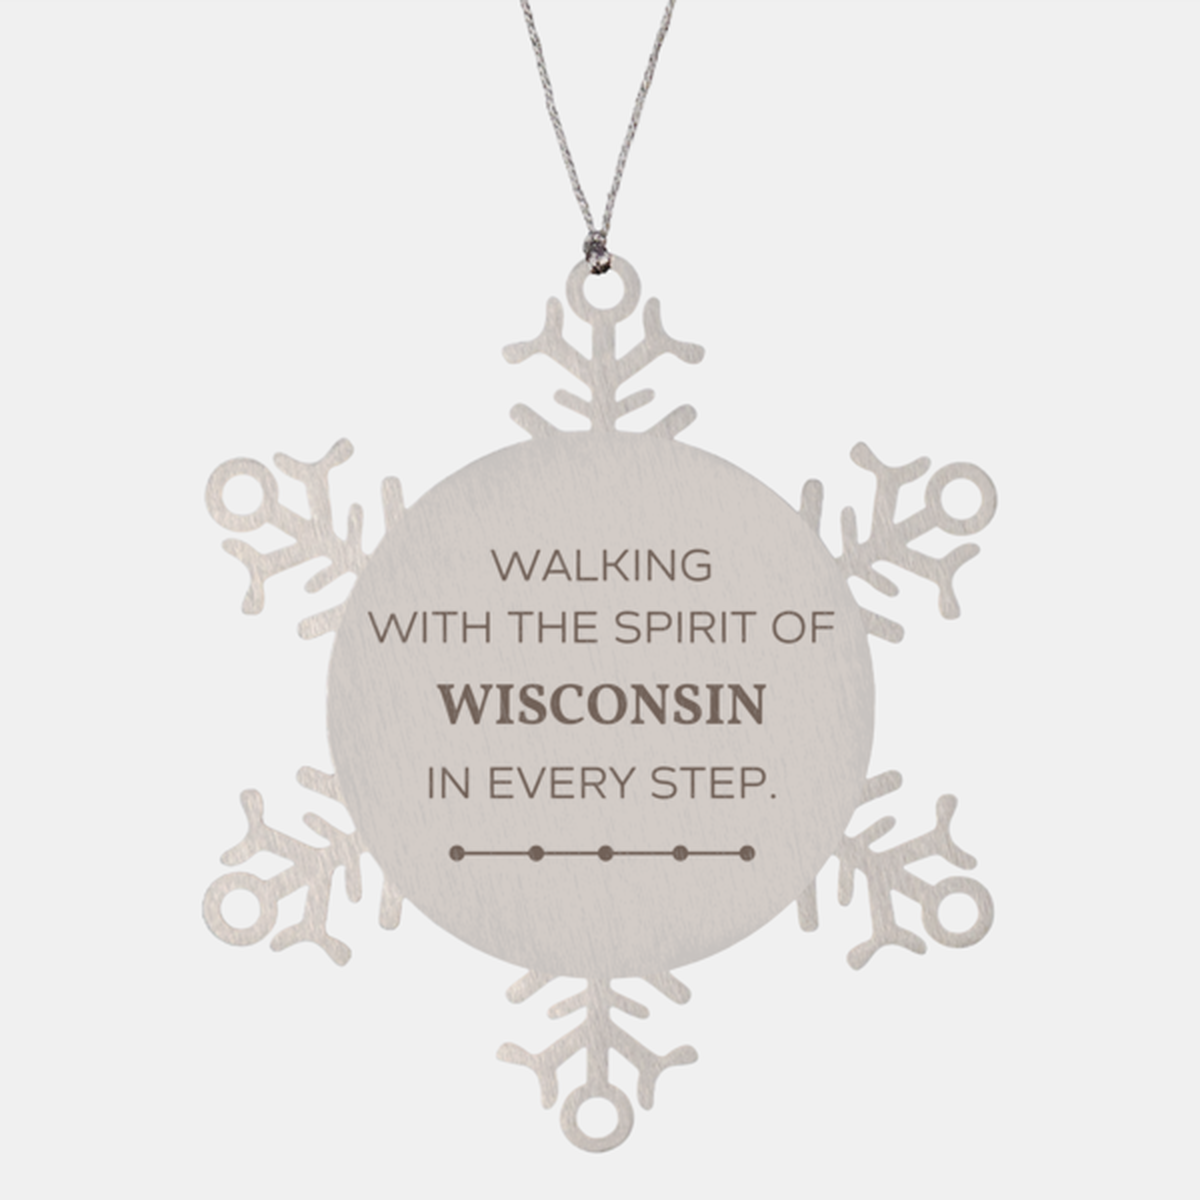 Wisconsin Gifts, Walking with the spirit, Love Wisconsin Birthday Christmas Snowflake Ornament For Wisconsin People, Men, Women, Friends